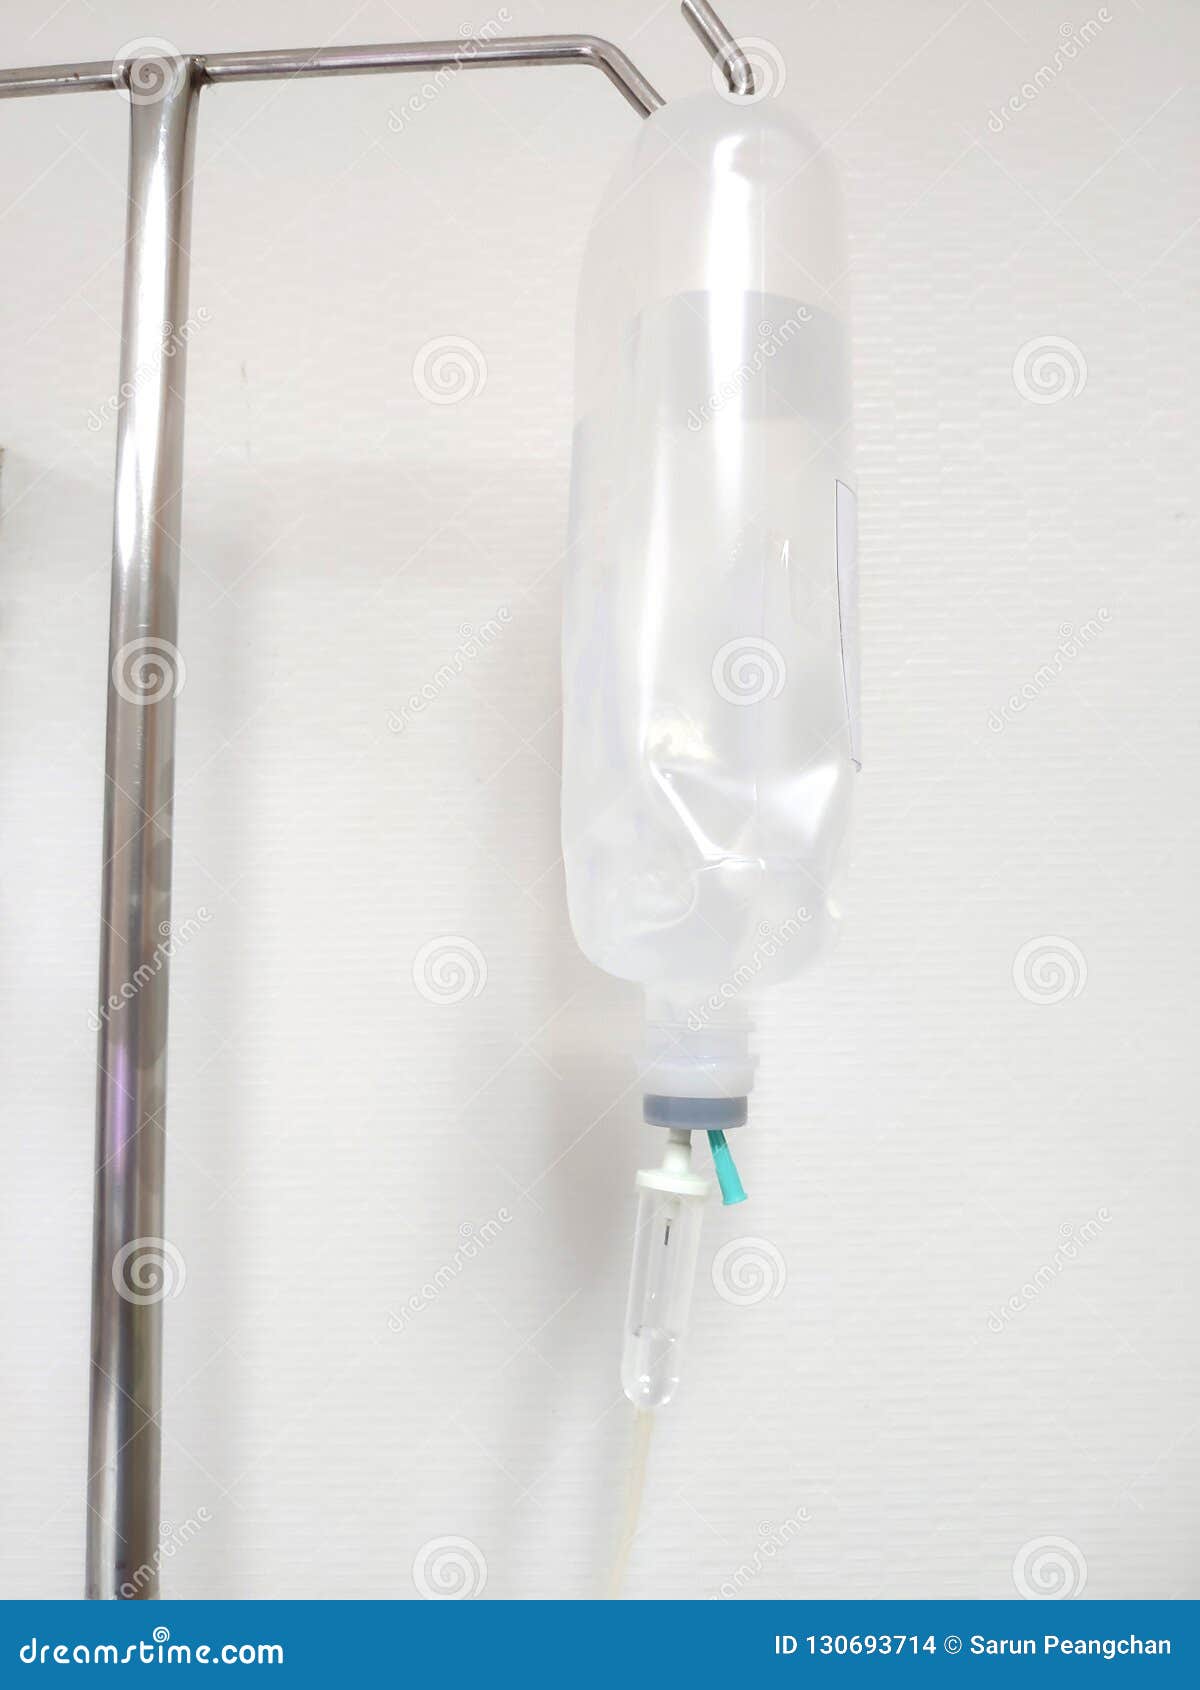 IV Bag Hanging on a Metal Pole in the Hospital Room Stock Image - Image of  hanging, drop: 115732469